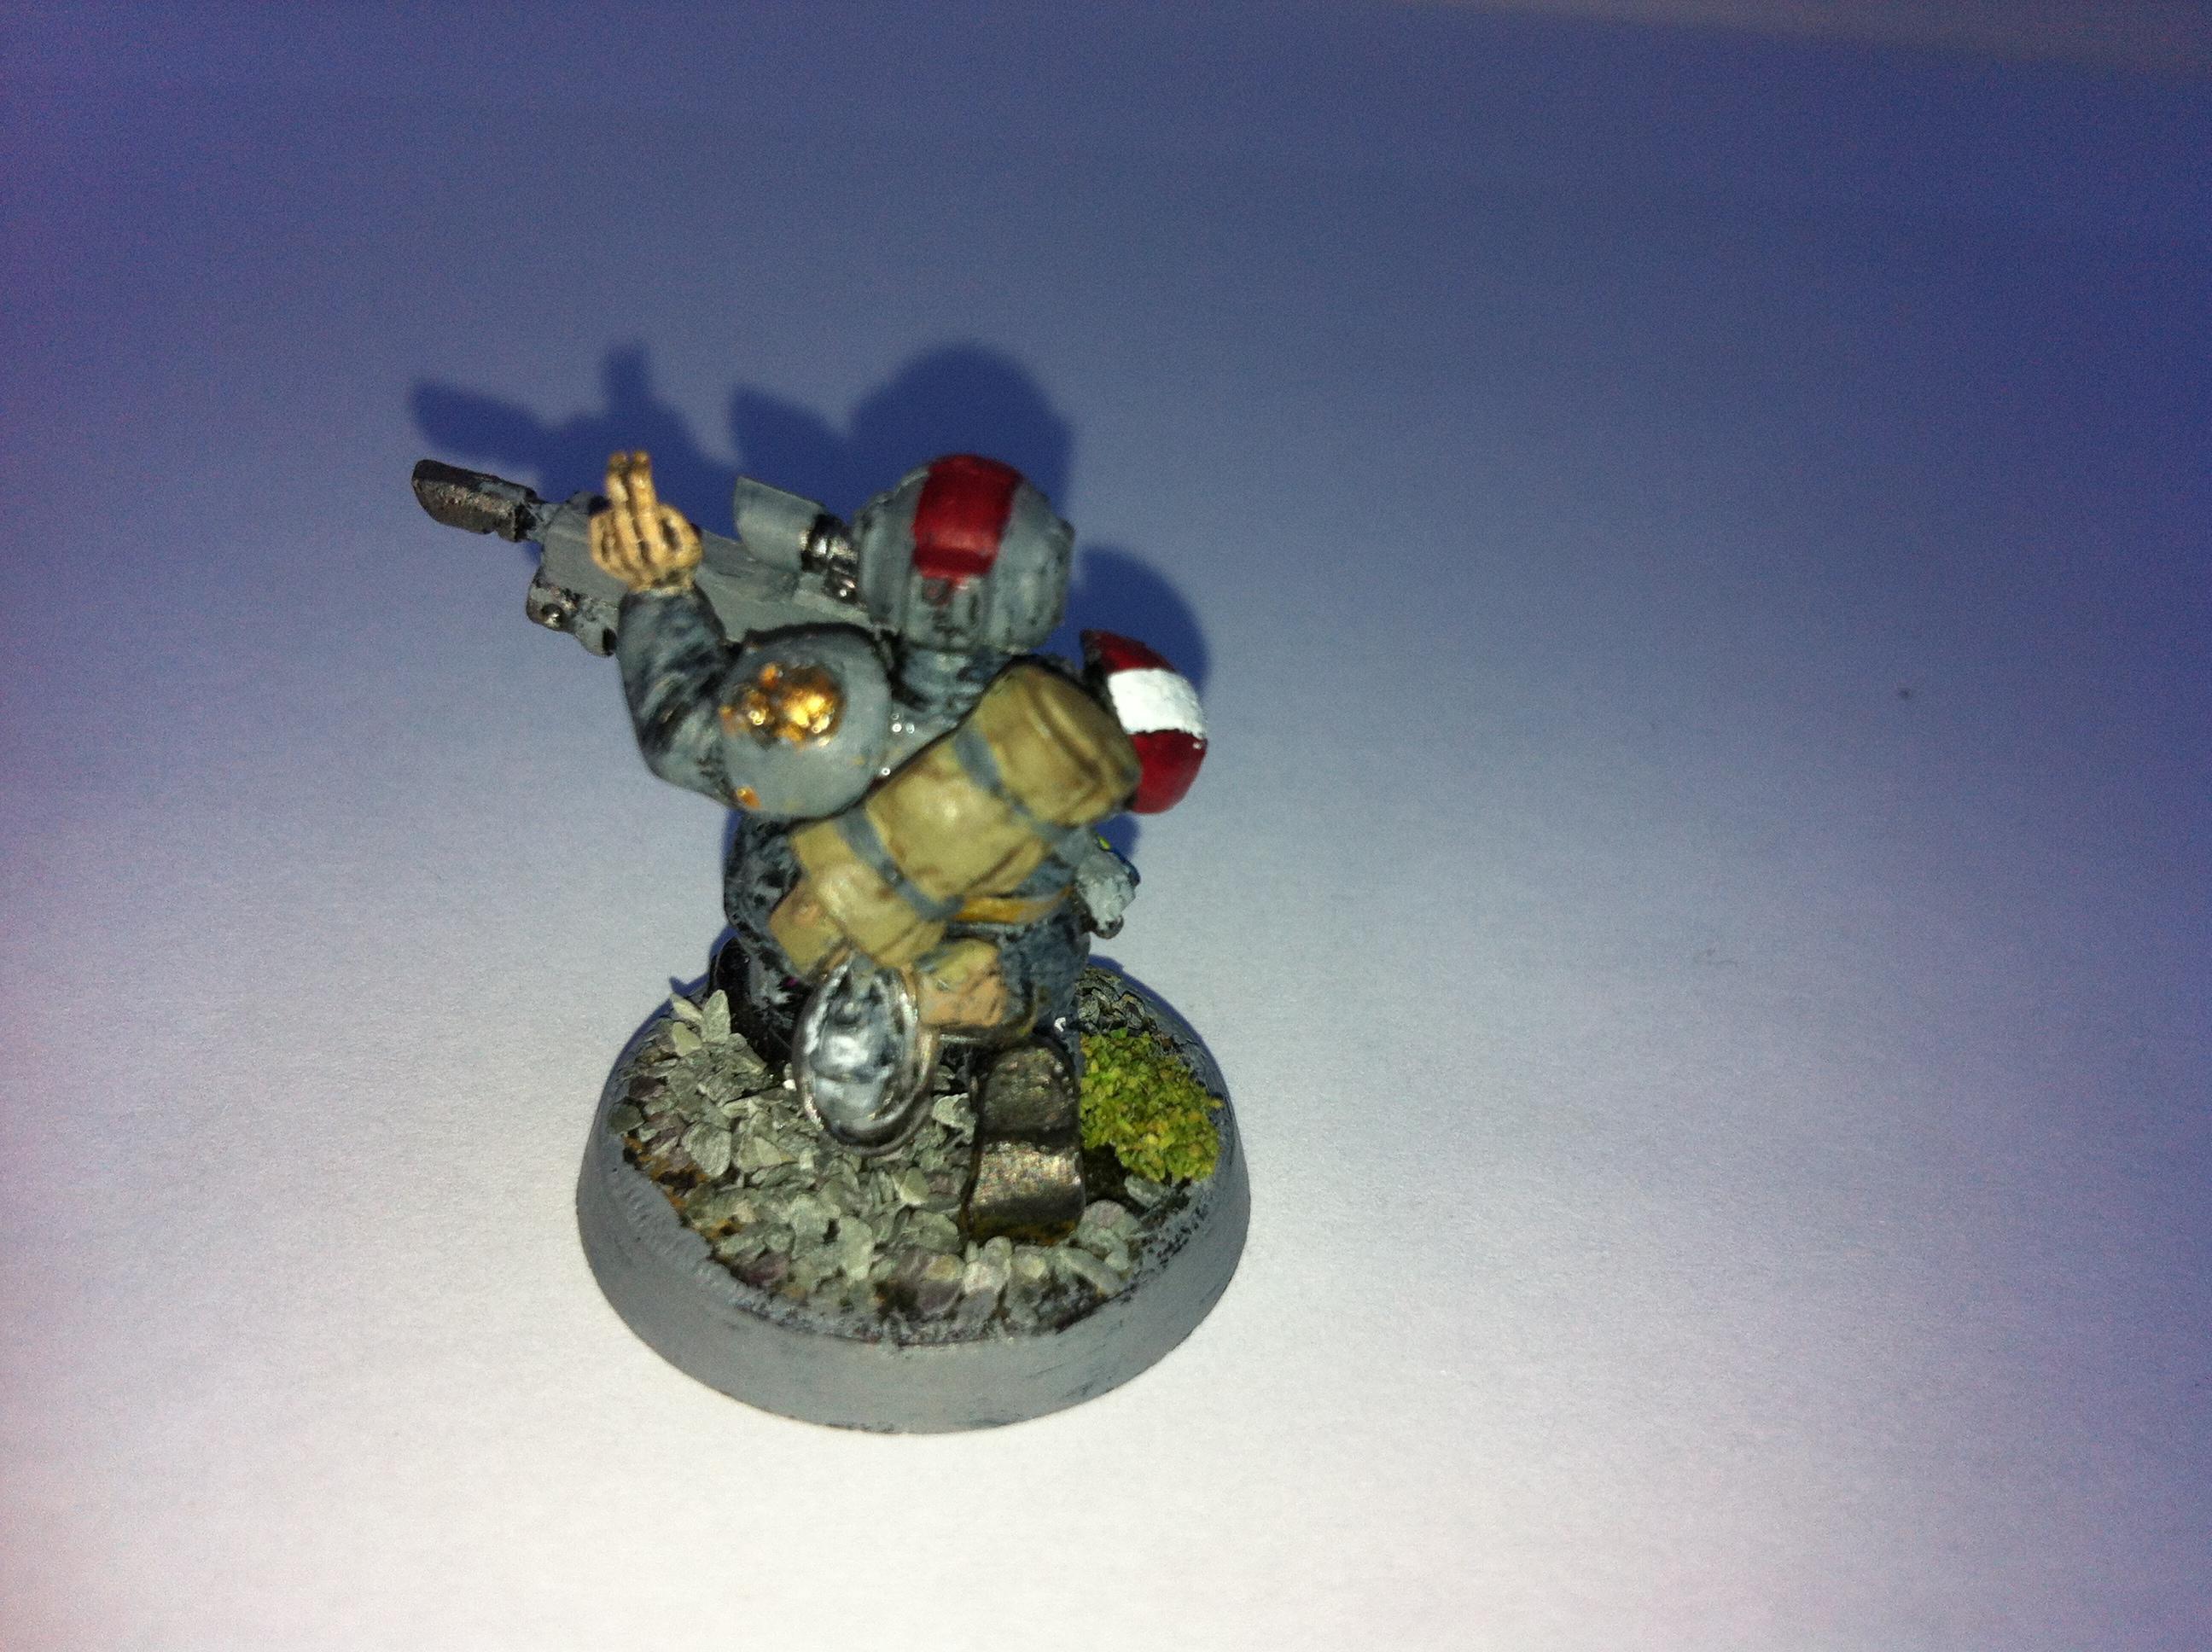 Cadian 57th, Captain, Imperial Guard, Imperial Guard Officer, Infantry